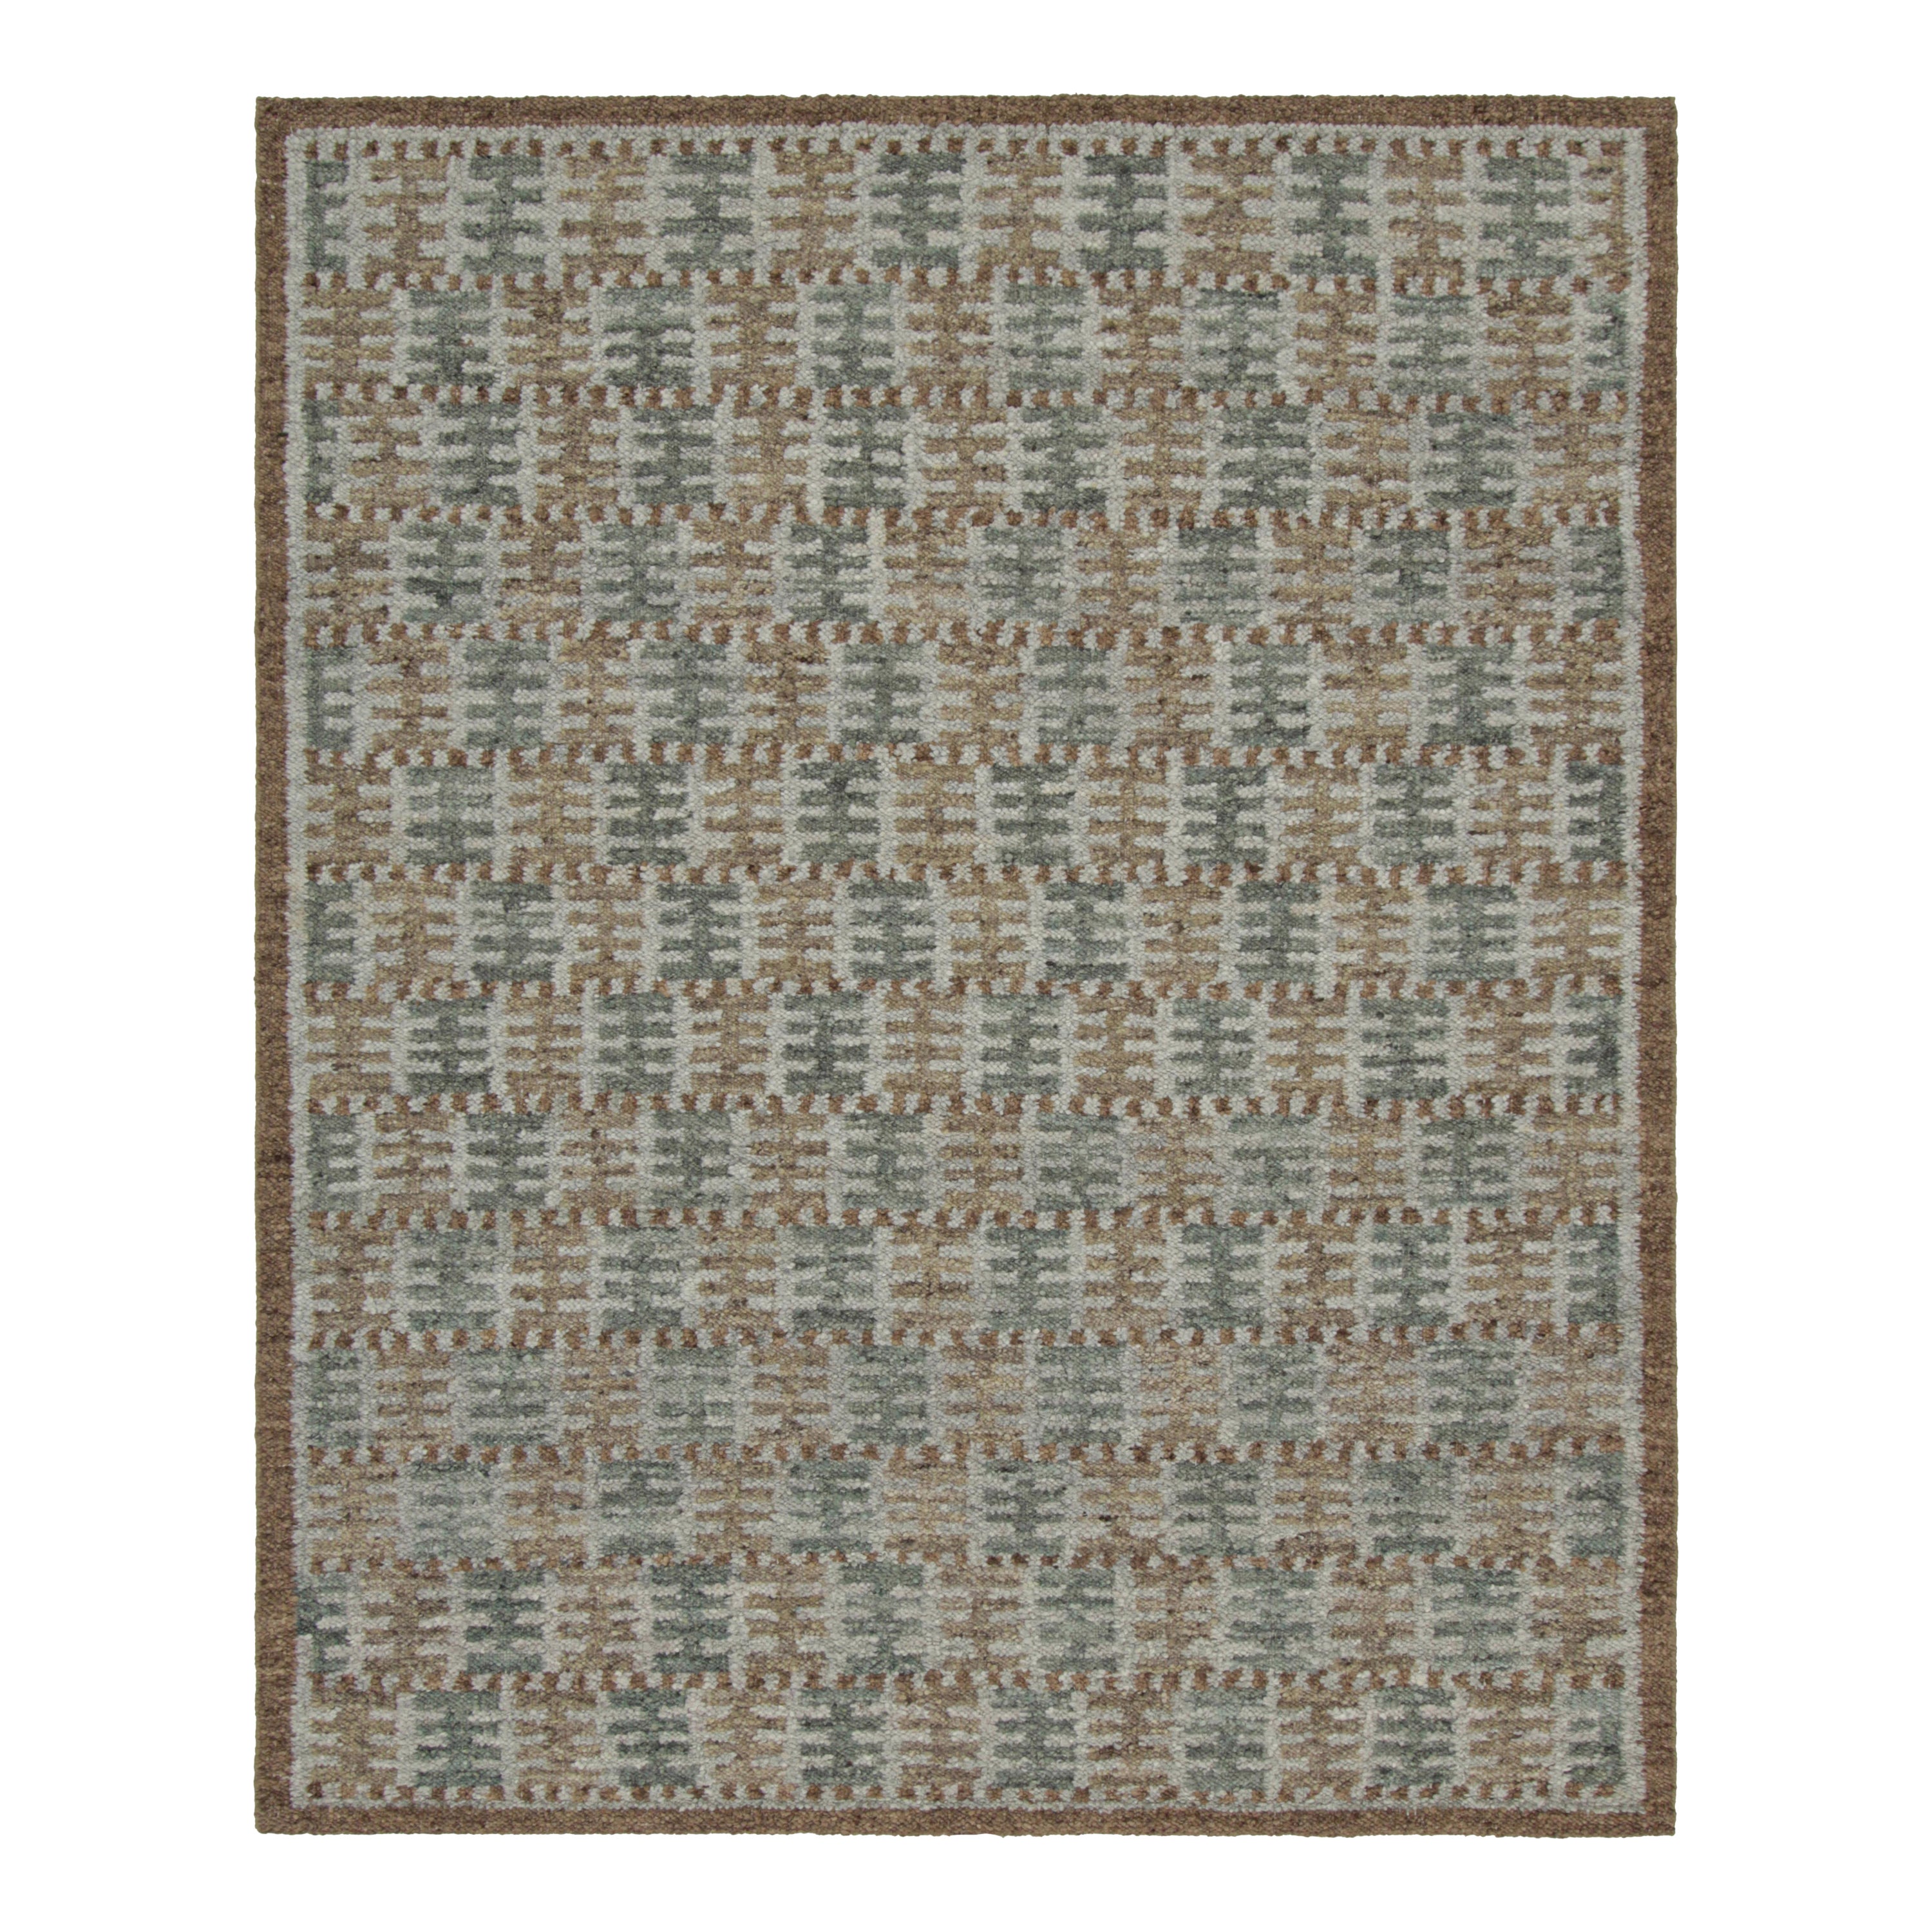 Rug & Kilim’s Scandinavian Style Rug in Beige-Brown and Teal Geometric Patterns For Sale